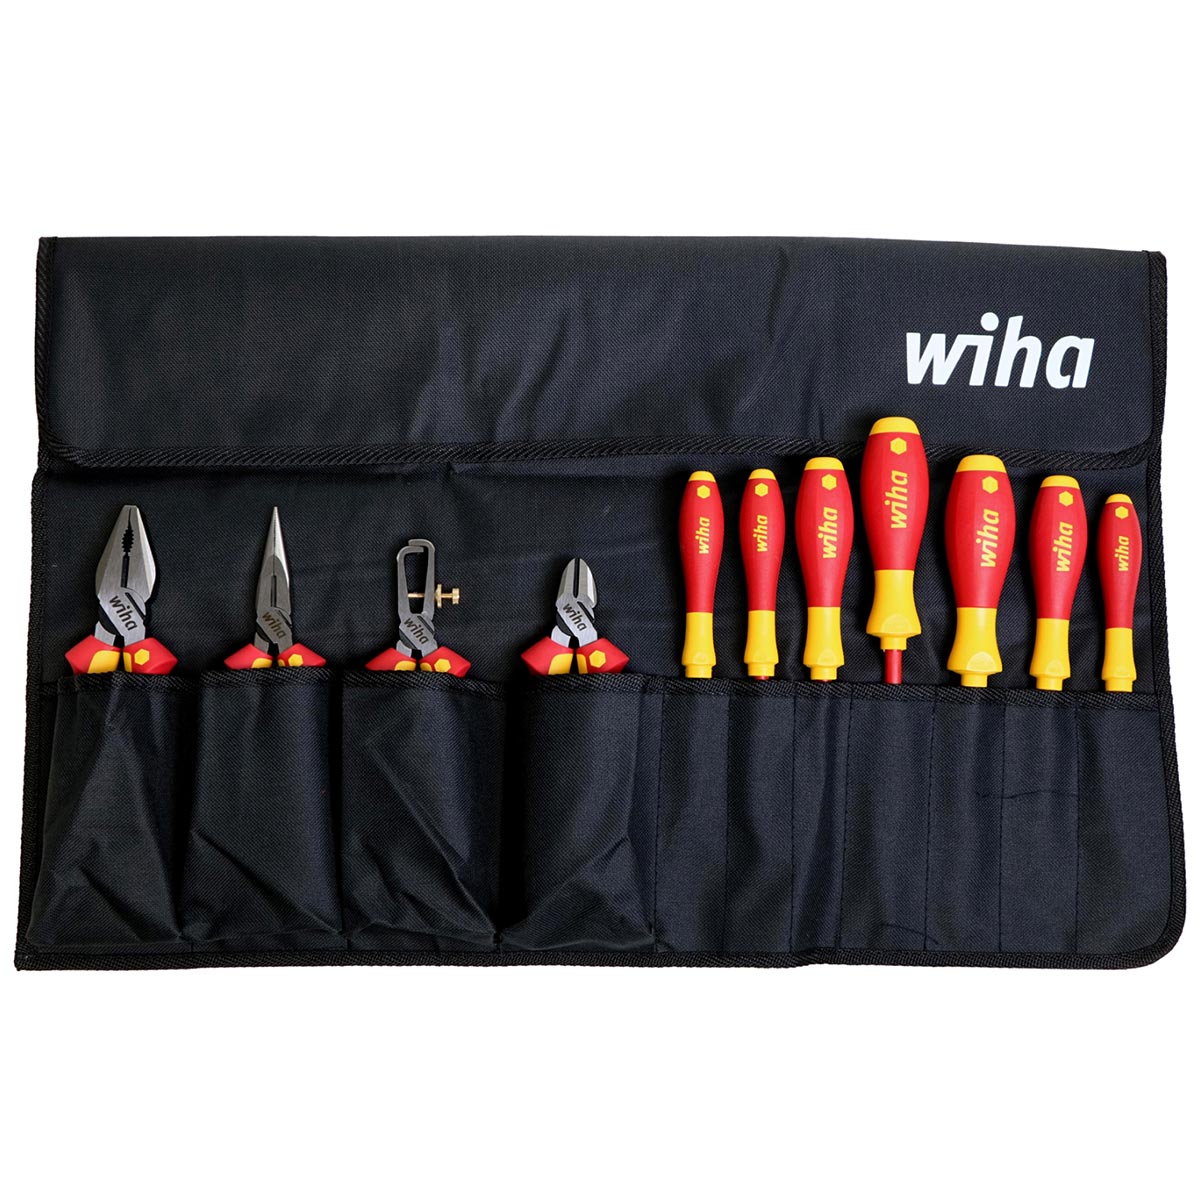 Wiha 32888 Insulated Pliers Cutters and Screwdriver – 11 Piece Set